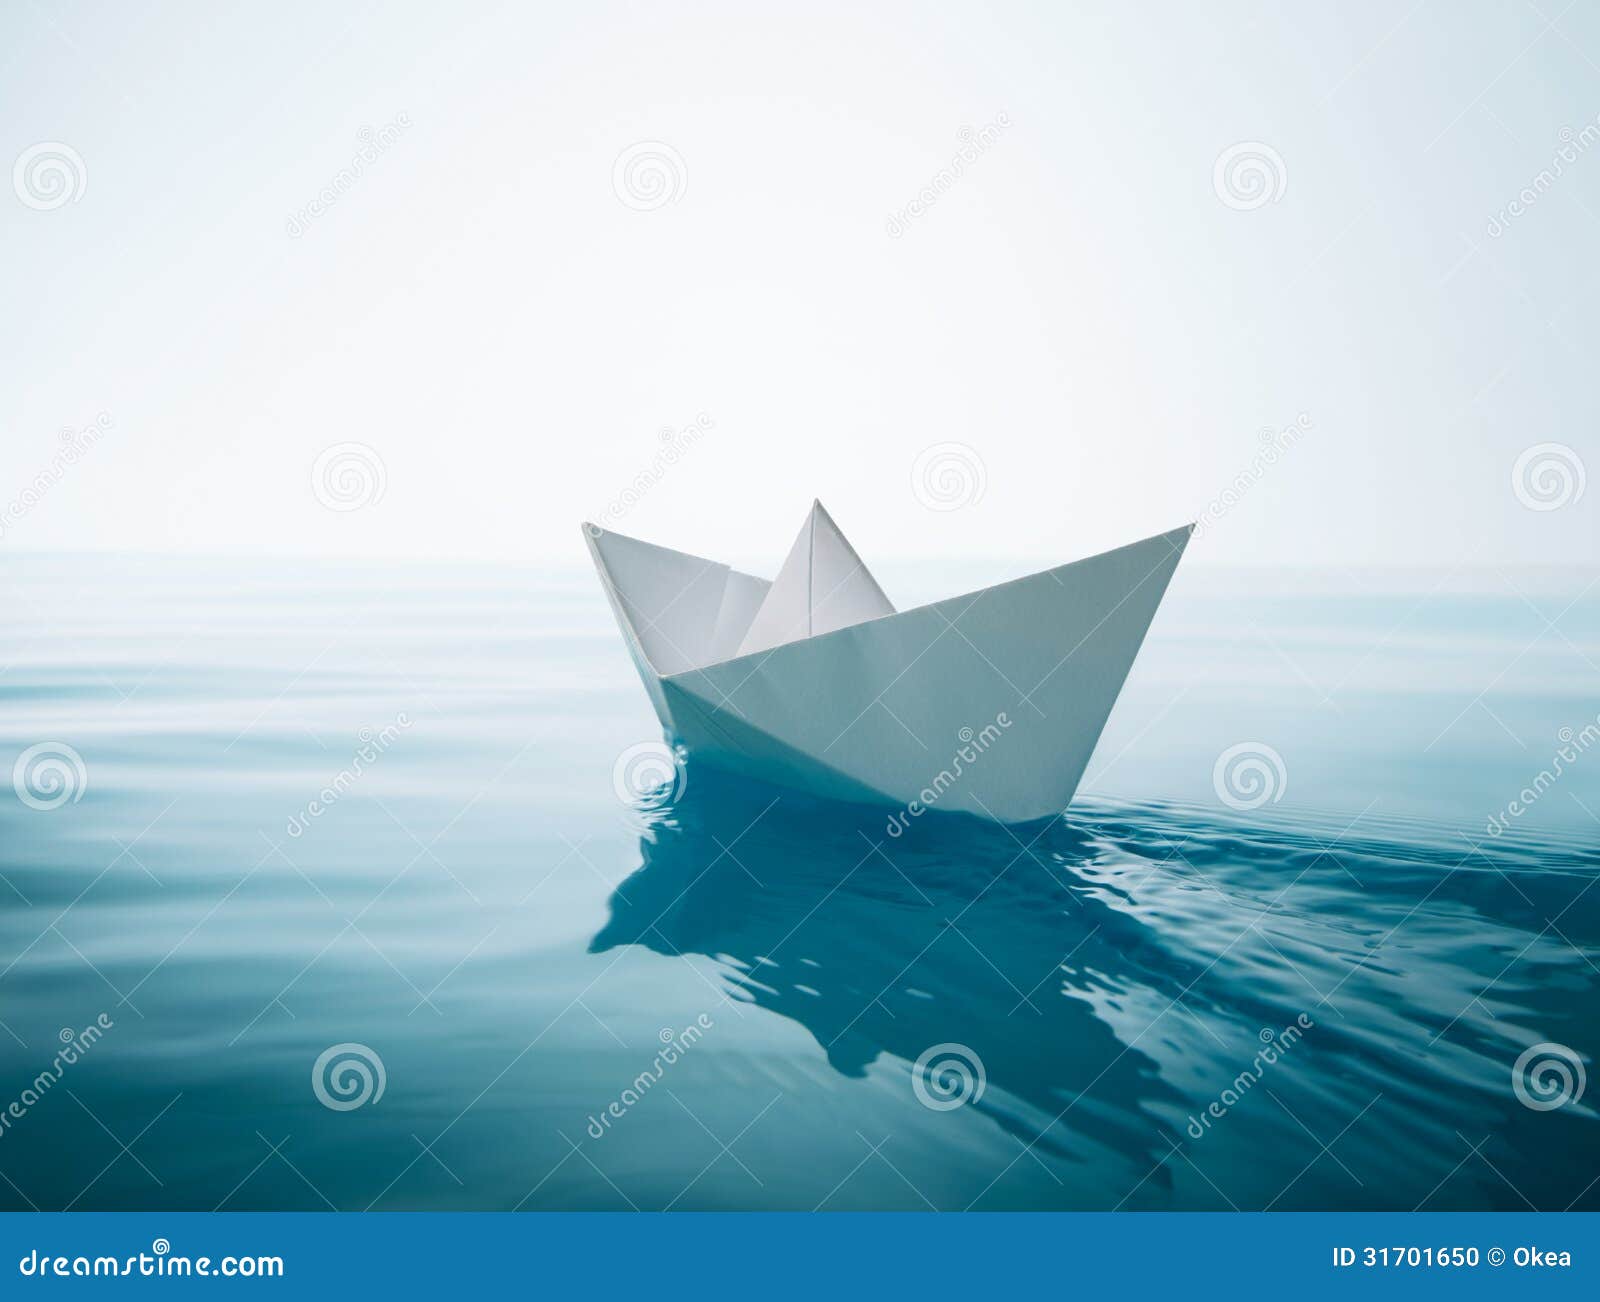 paper boat clipart - photo #46